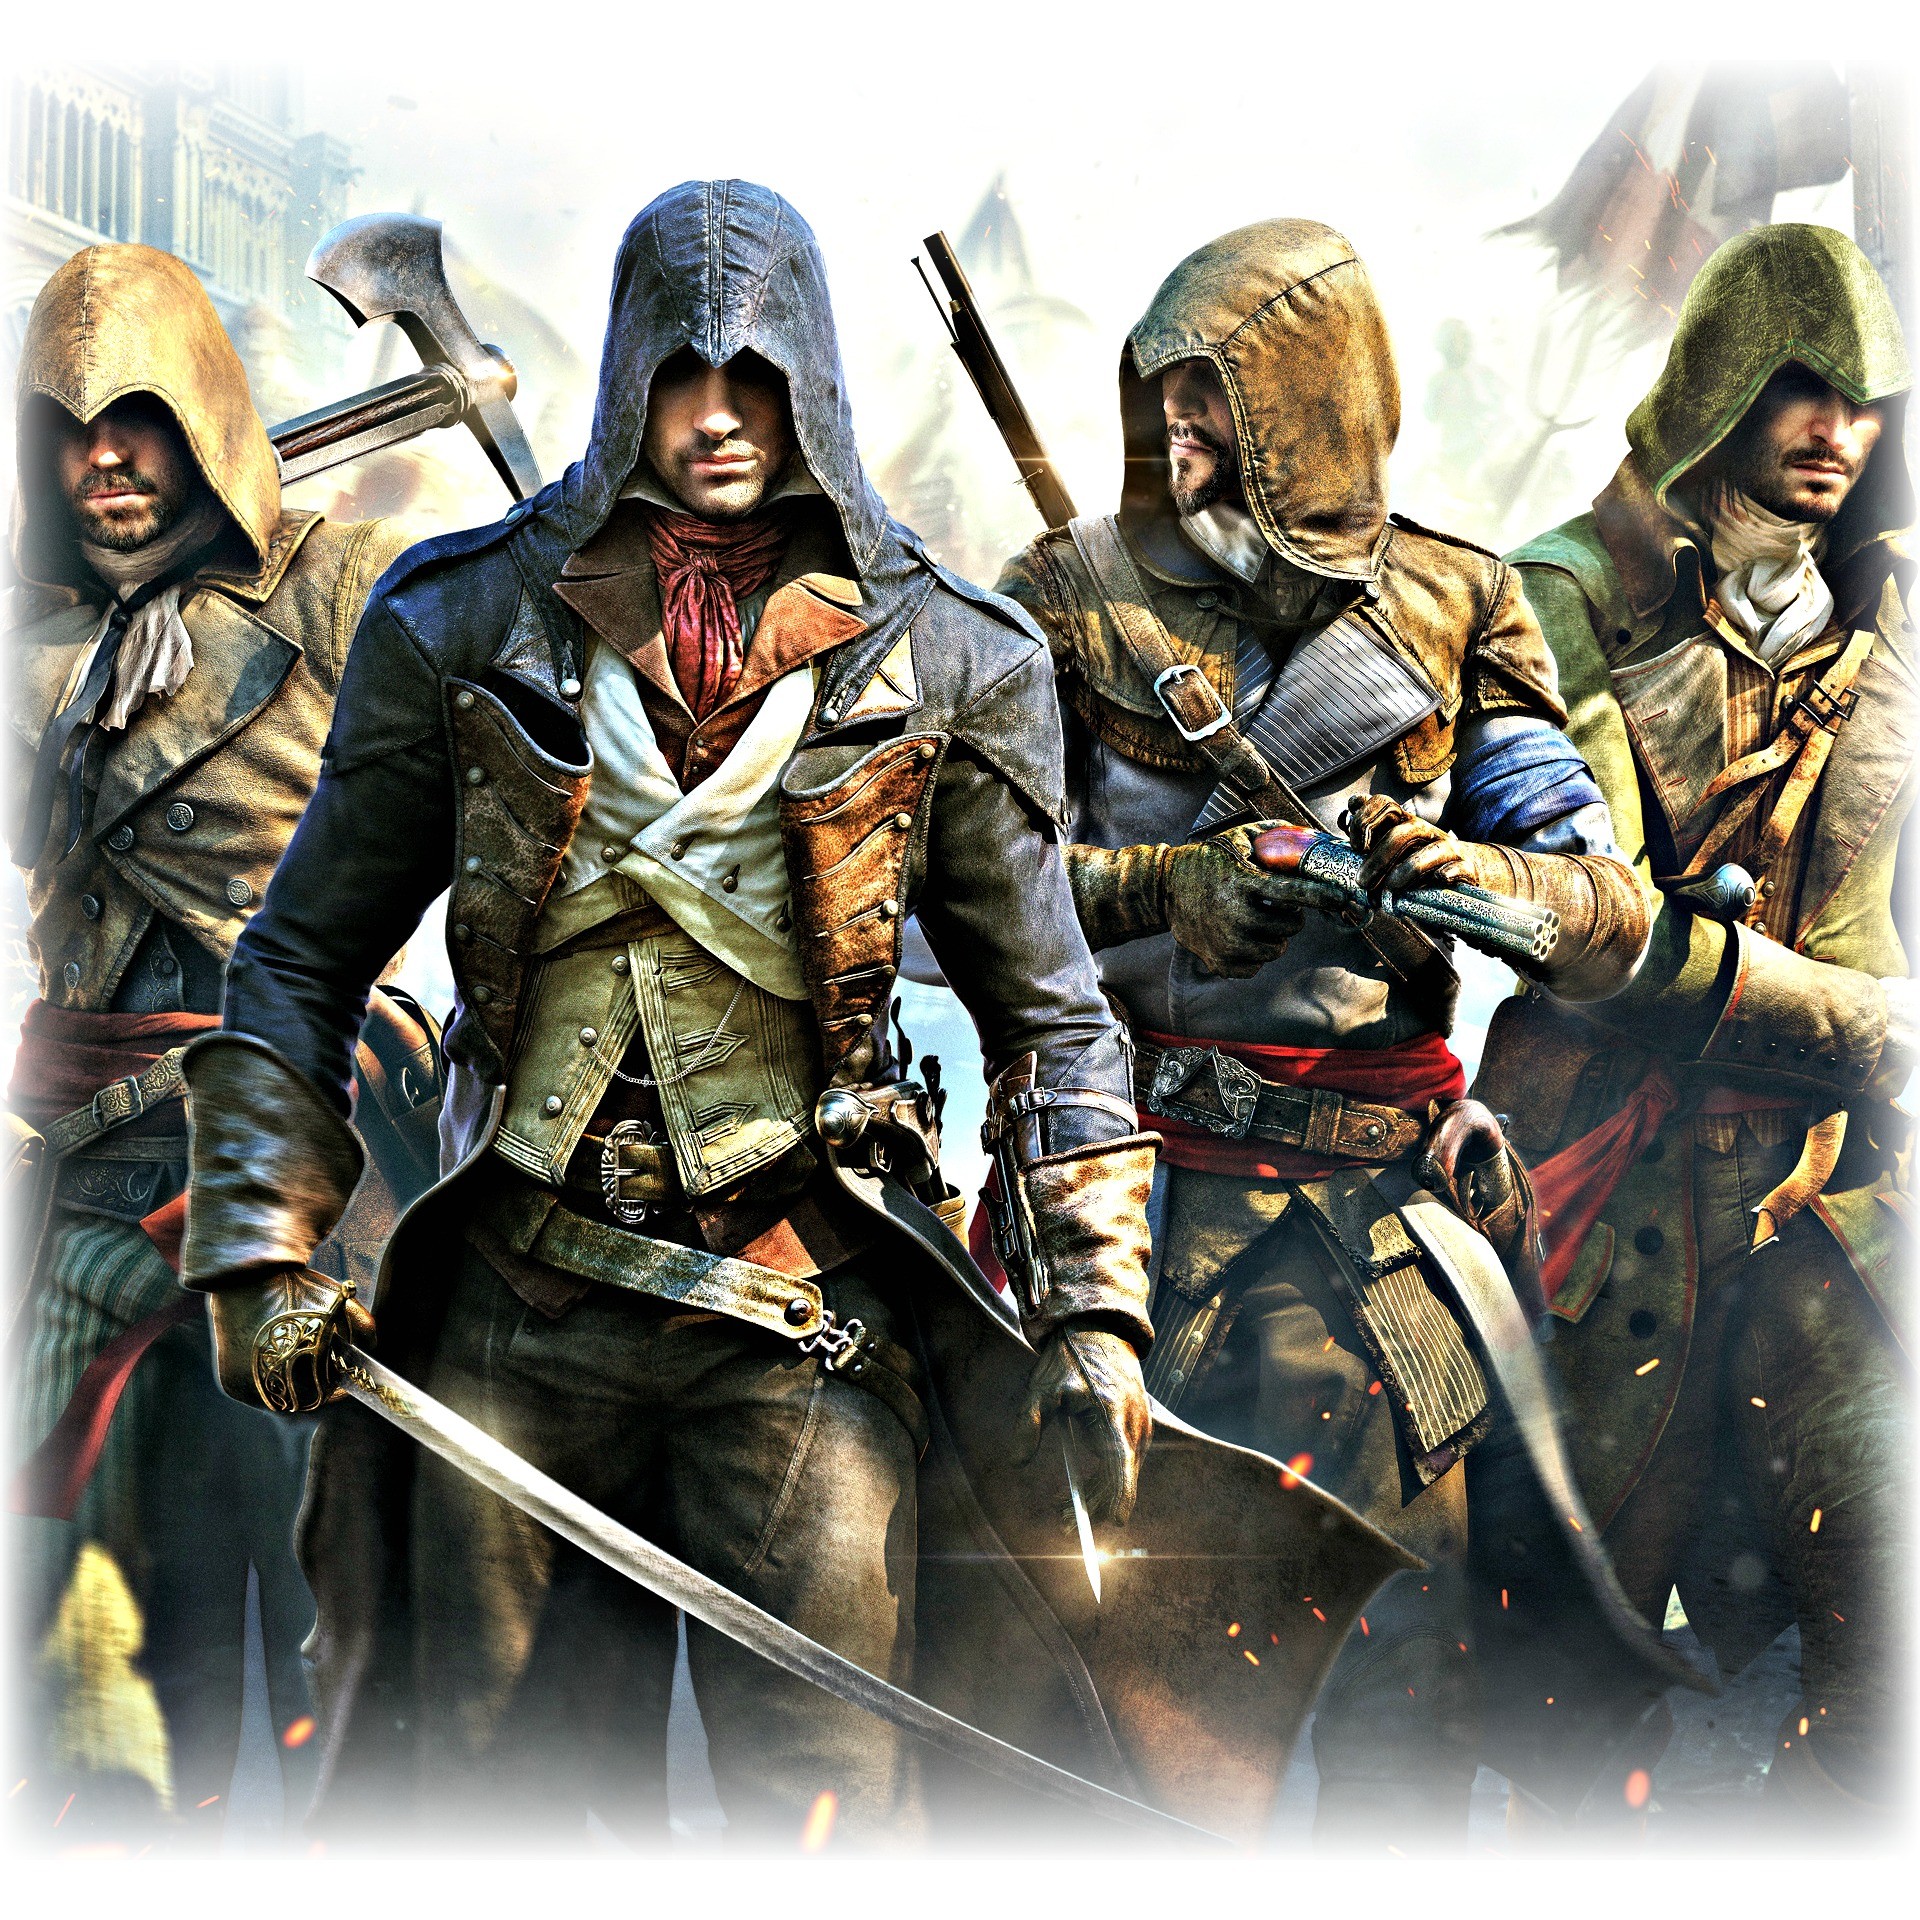 1920x1920 Assassin Creed Wallpaper Hd For Android - image #729989